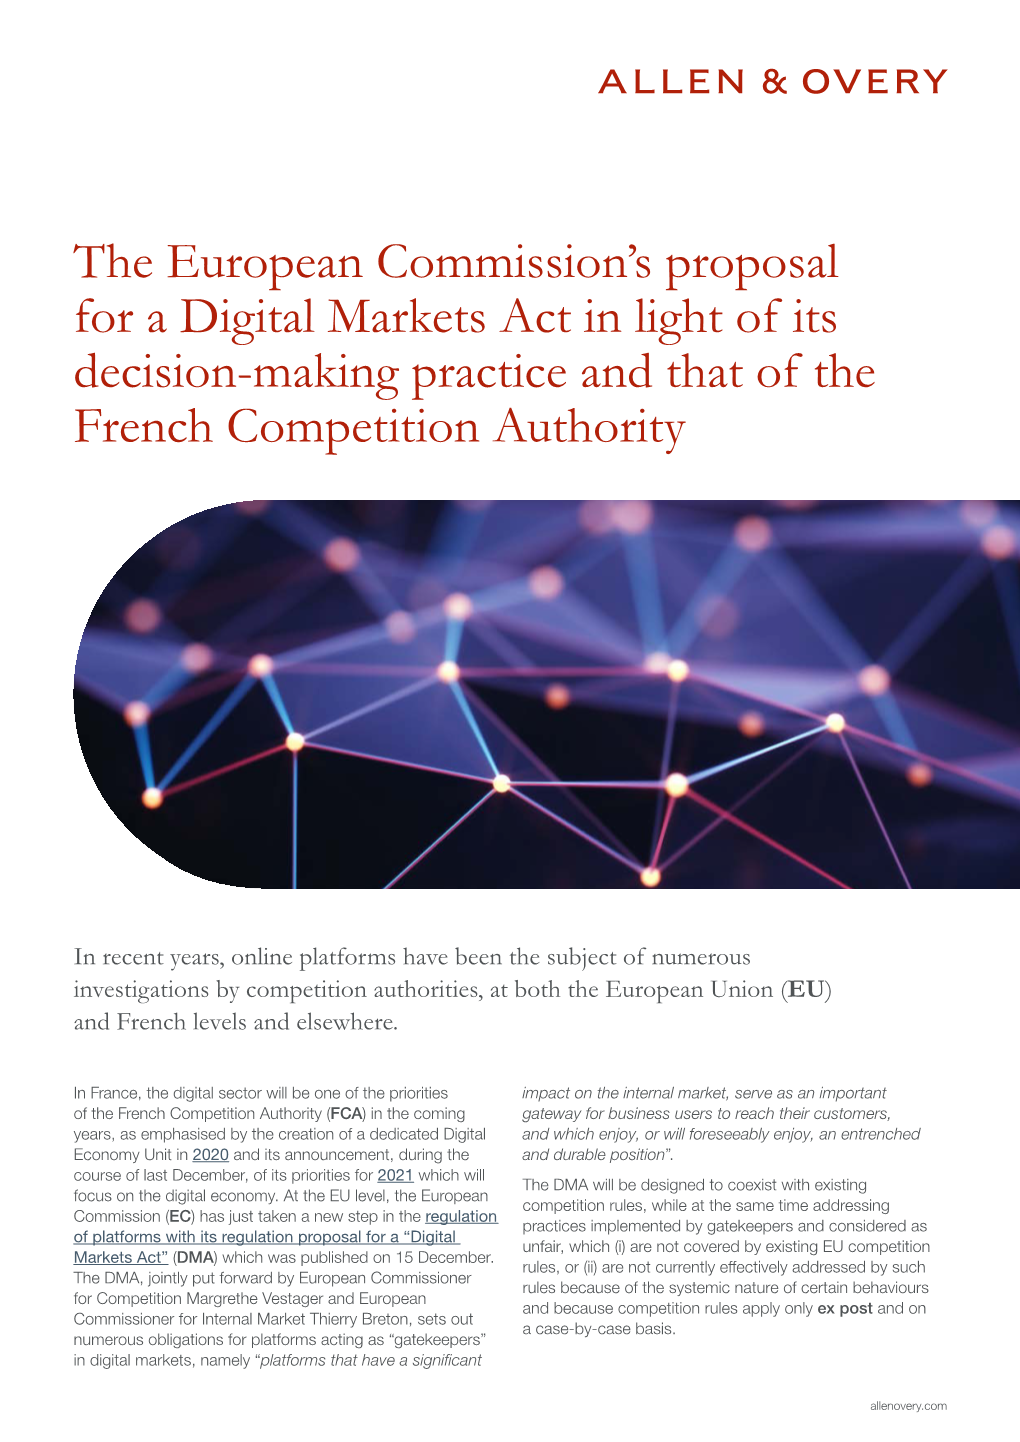 The European Commission's Proposal for a Digital Markets Act in Light Of